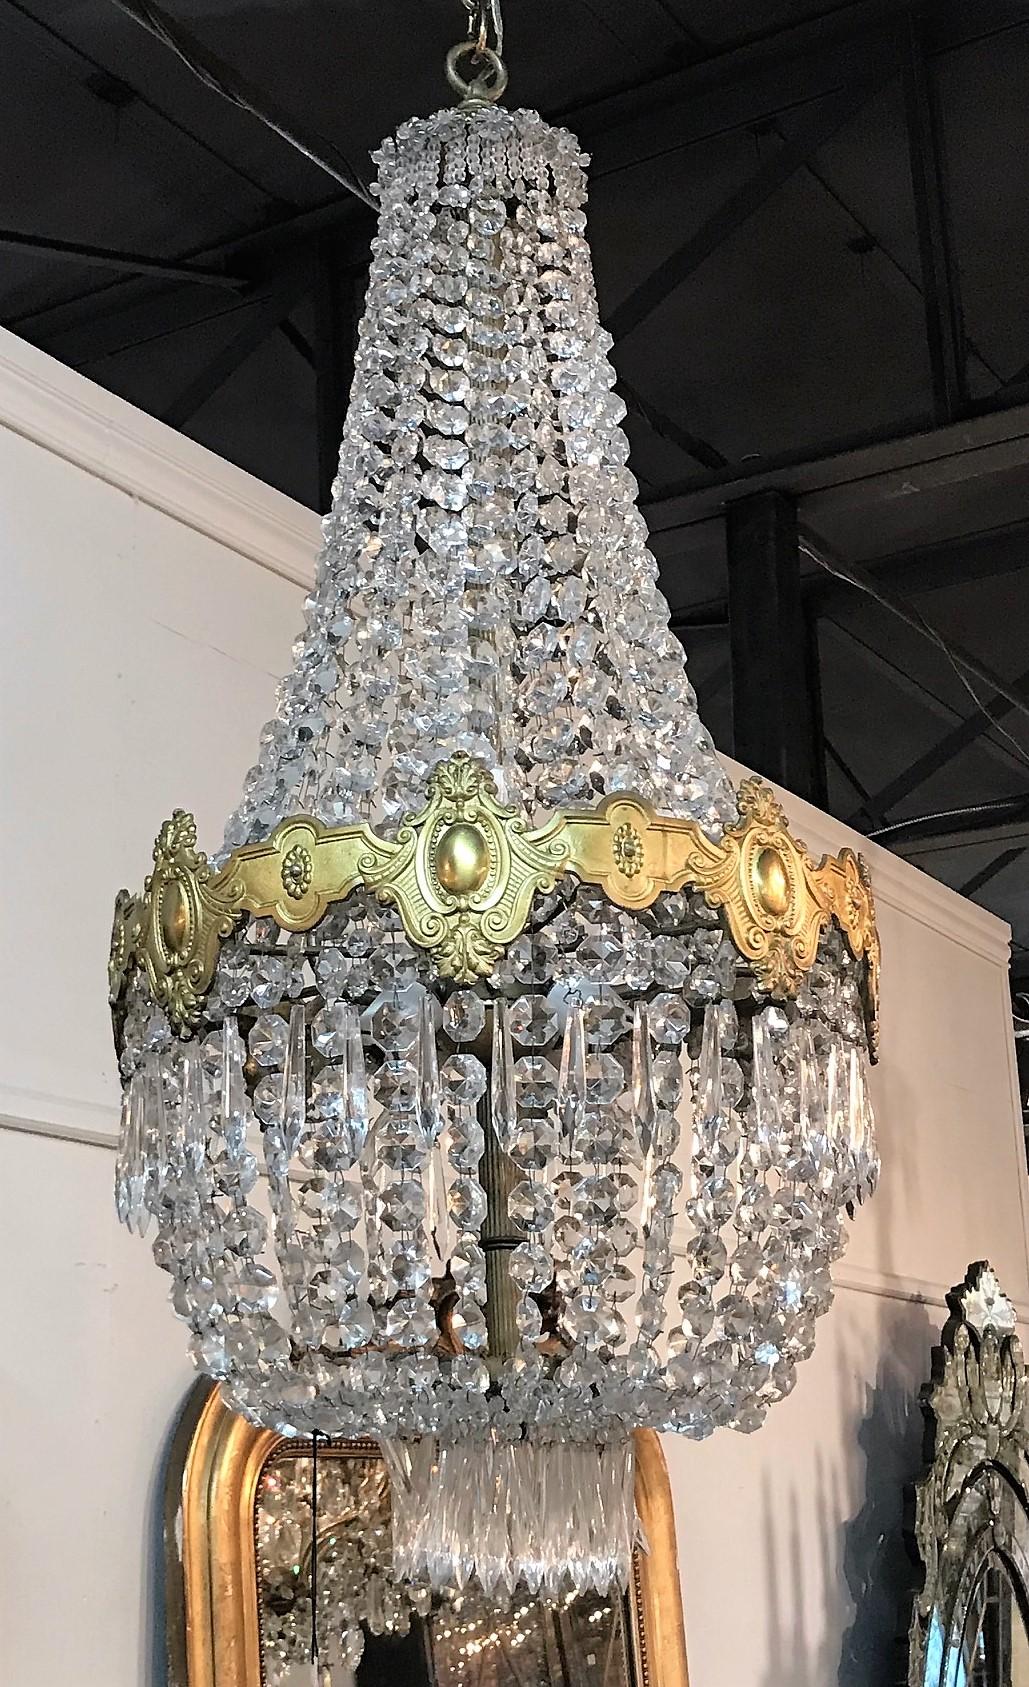 Fabulous French crystal and gilt bronze basket-form chandelier. The embossed gilt bronze band separates long beautiful strands of cut crystal beads with flower head accents. 

Made in France, circa 1900.